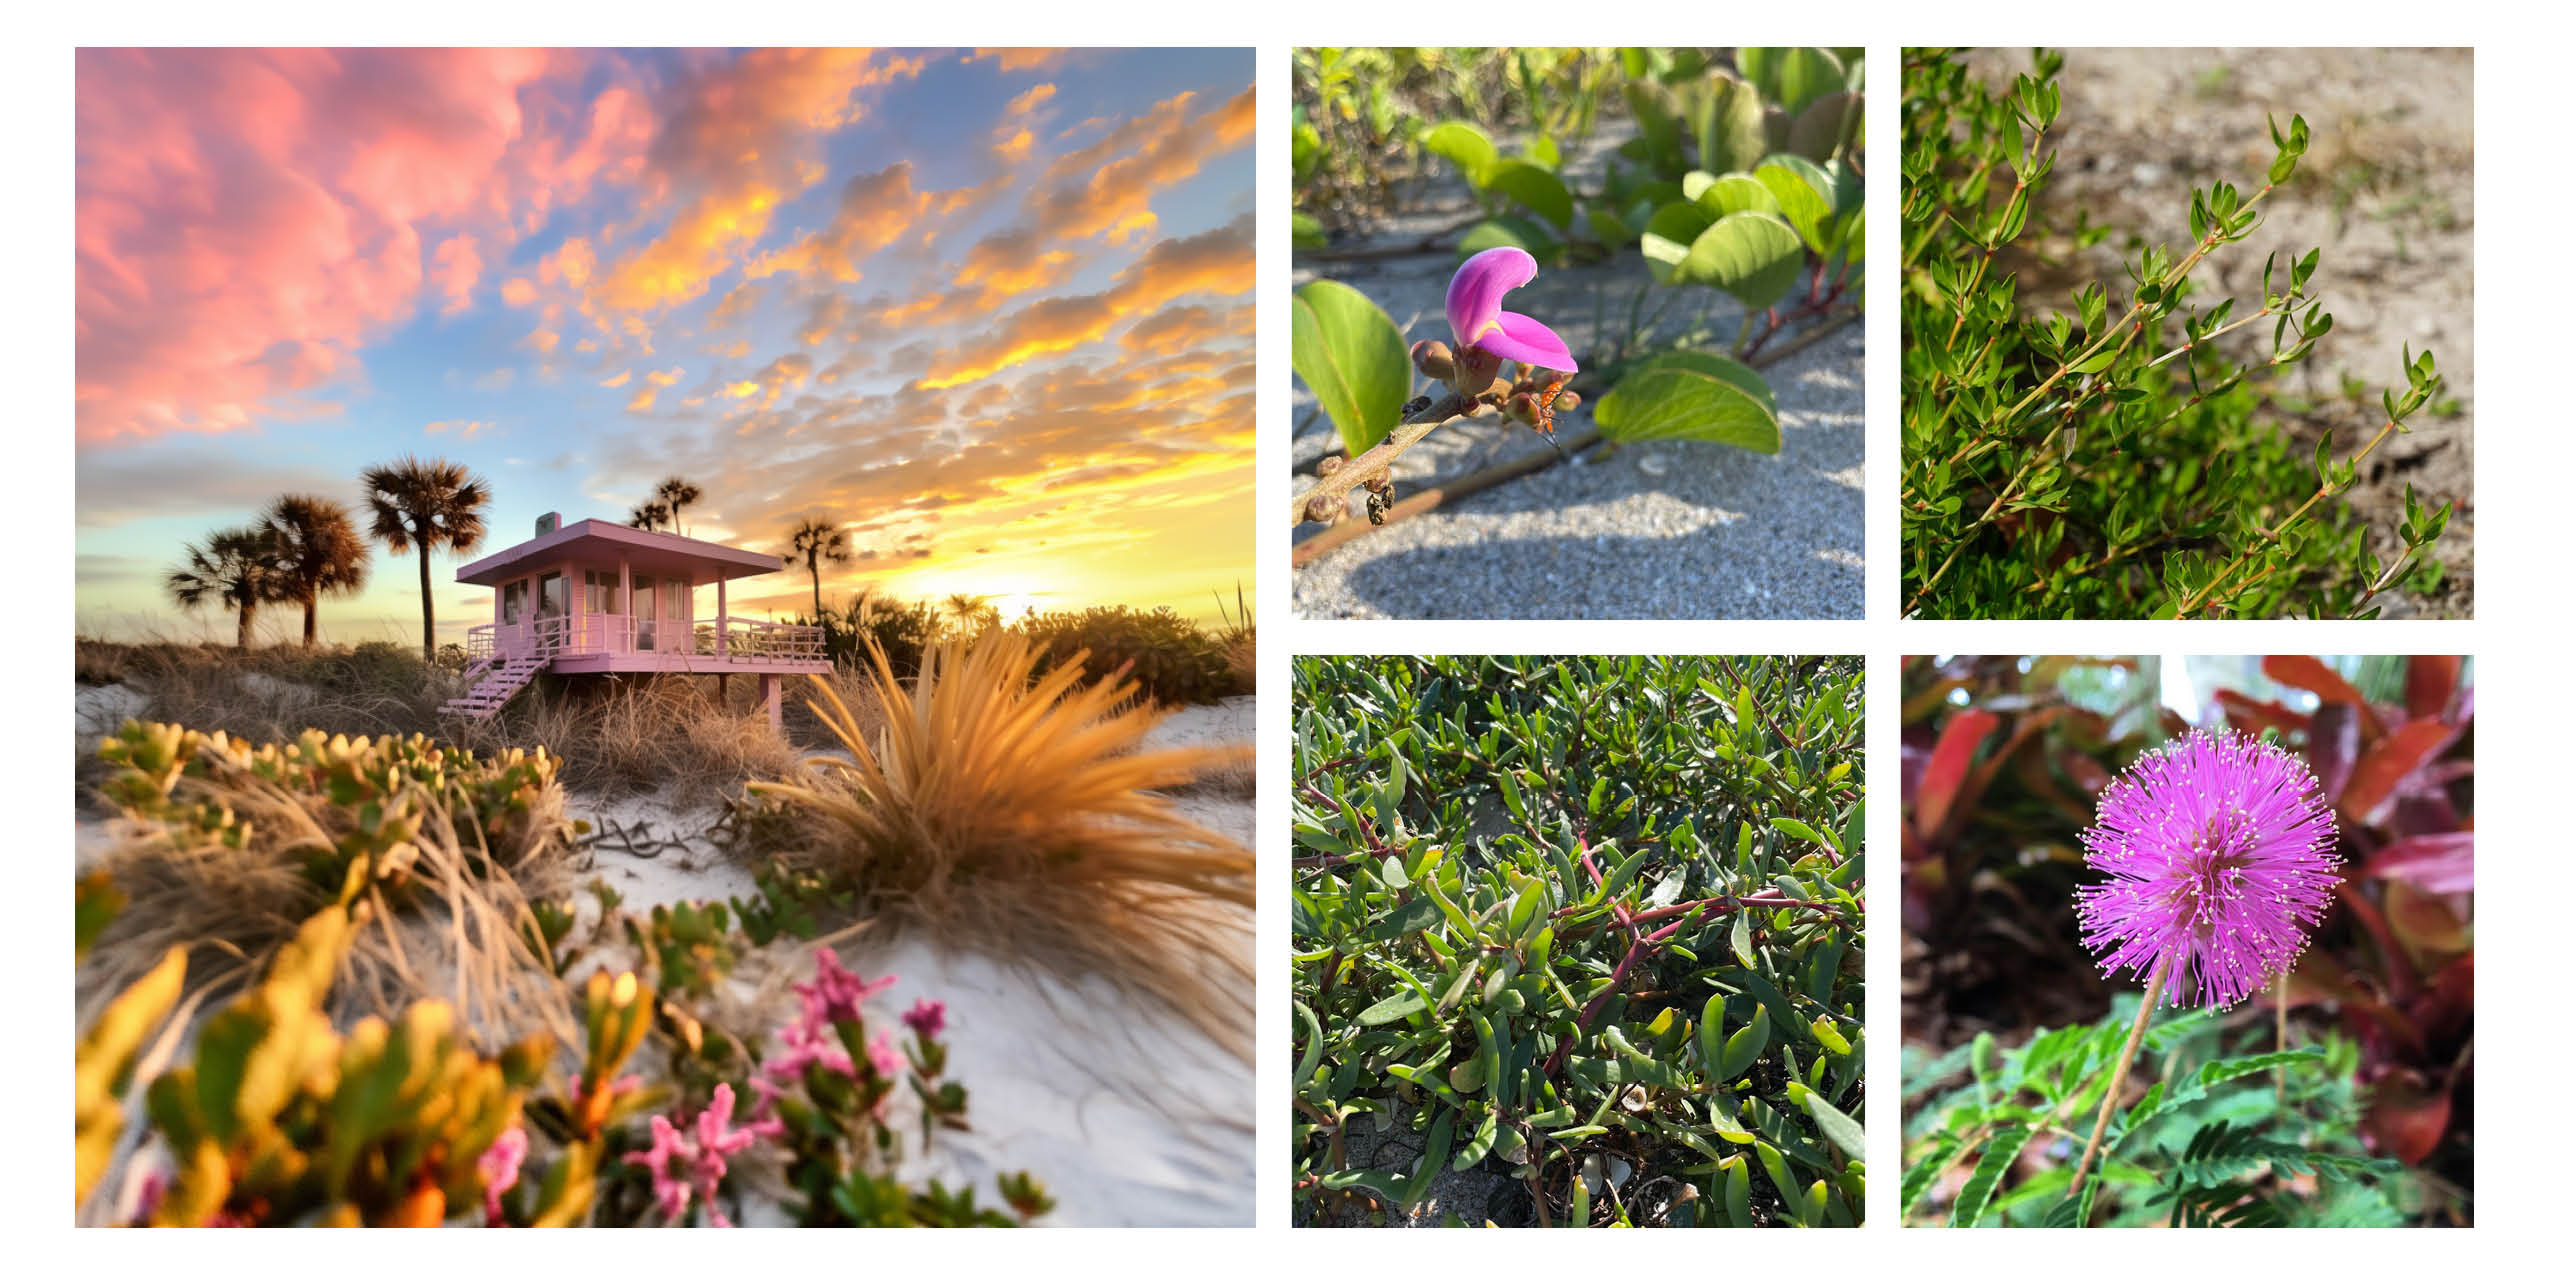 Cadence envisioned a fantastical beach cottage - and explained the Florida native plants that they'd use to actually create this landscape. Plant (starting upper left, clockwise): Baybean (Canavalia rosea), Beach Creeper (Ernodea littoralis), Sunshine Mimosa (Mimosa strigillosa), Pink Purslane (Portulaca pilosa). photos by Stephanie Dunn. 